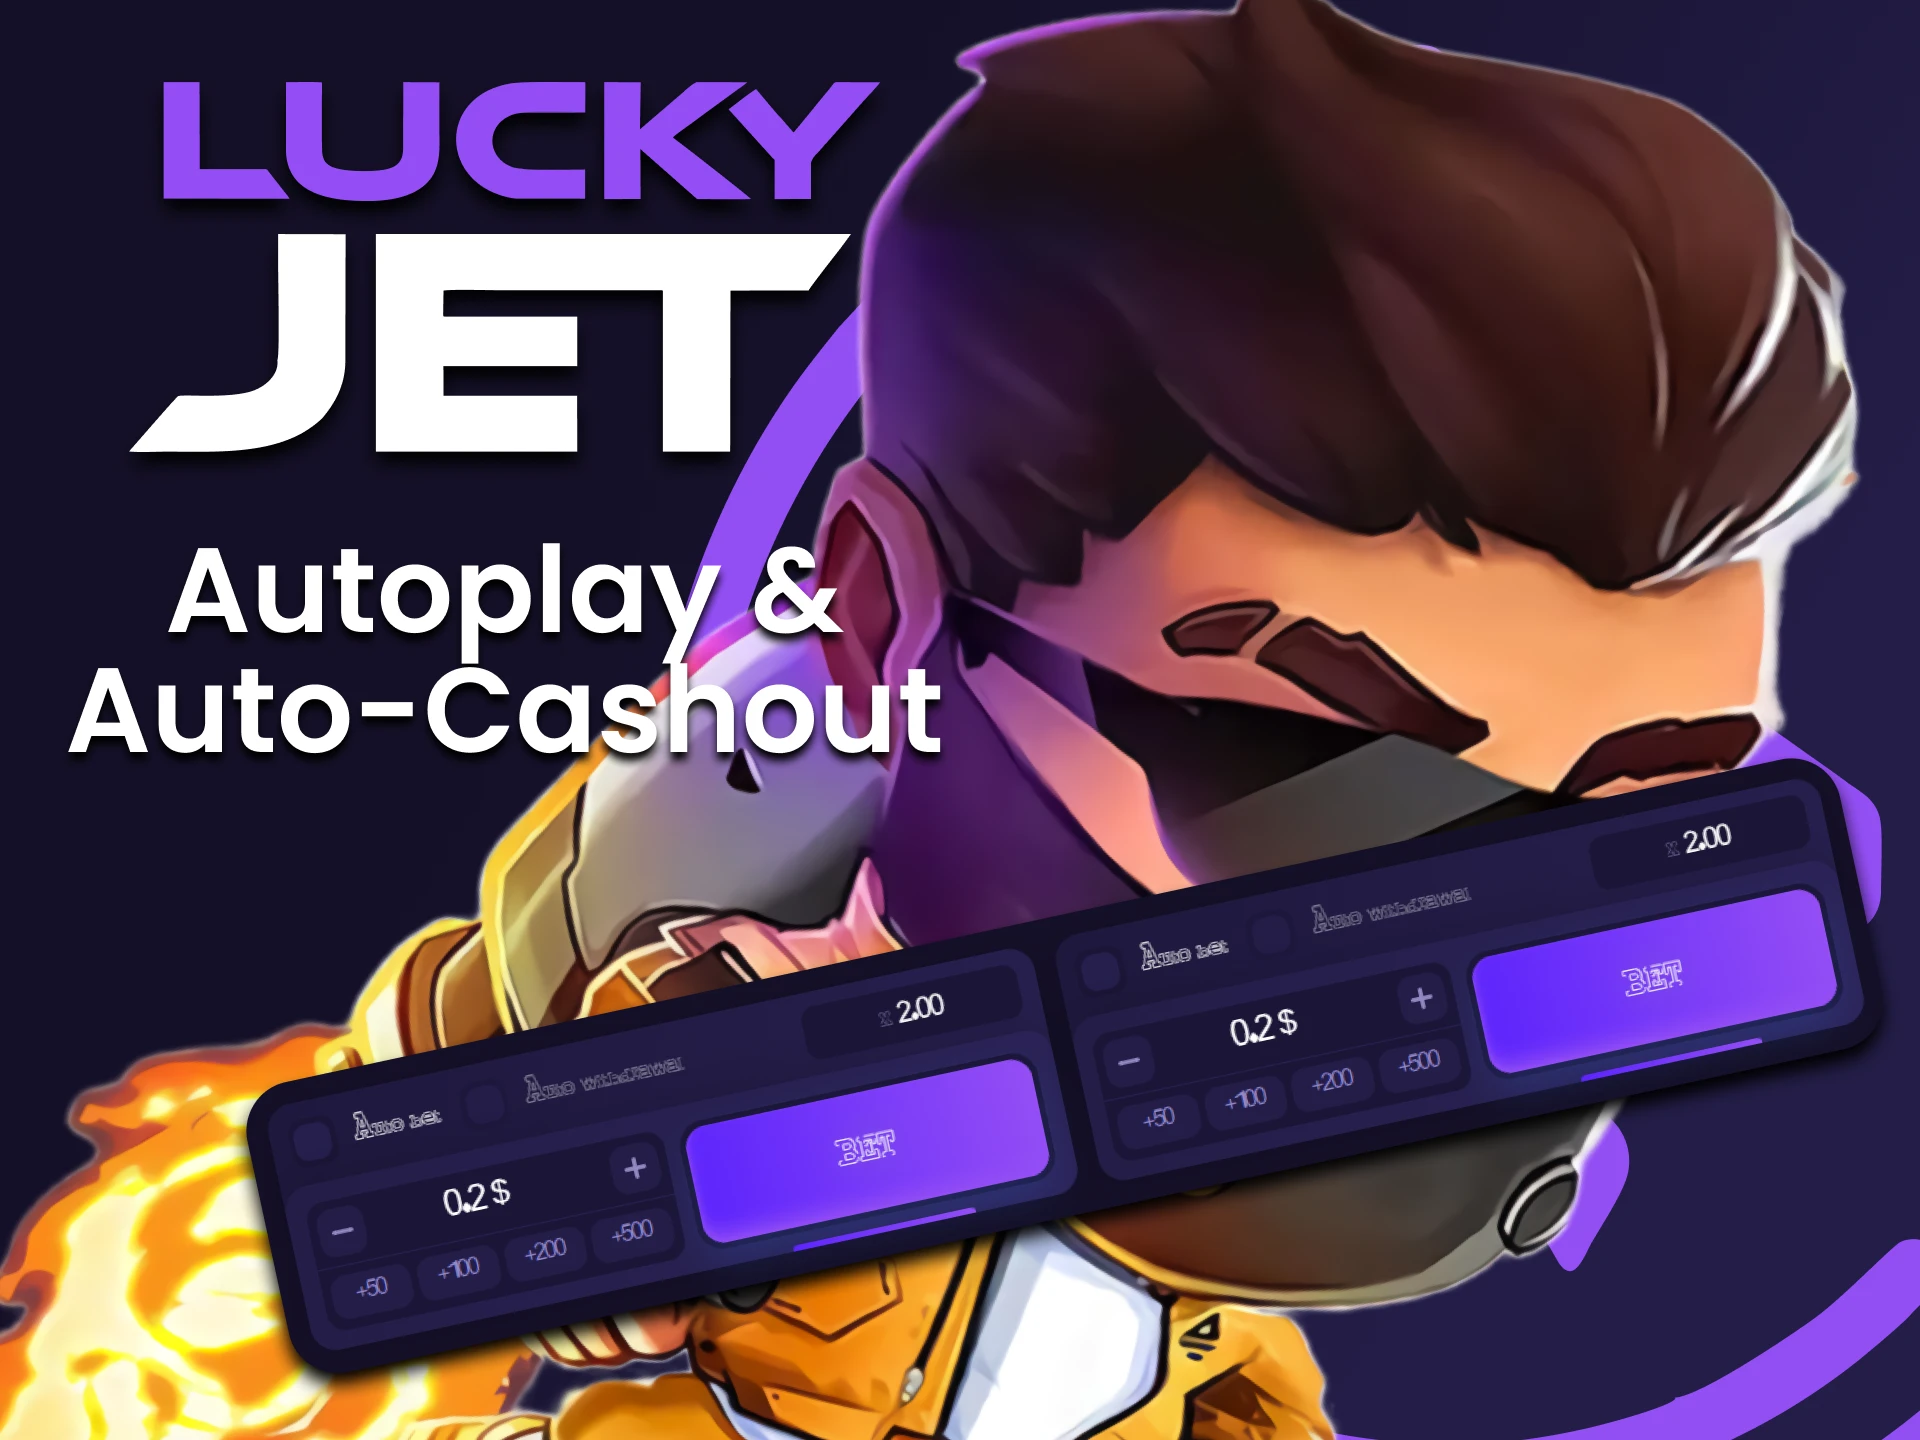 Use the auto feature to play Lucky Jet.